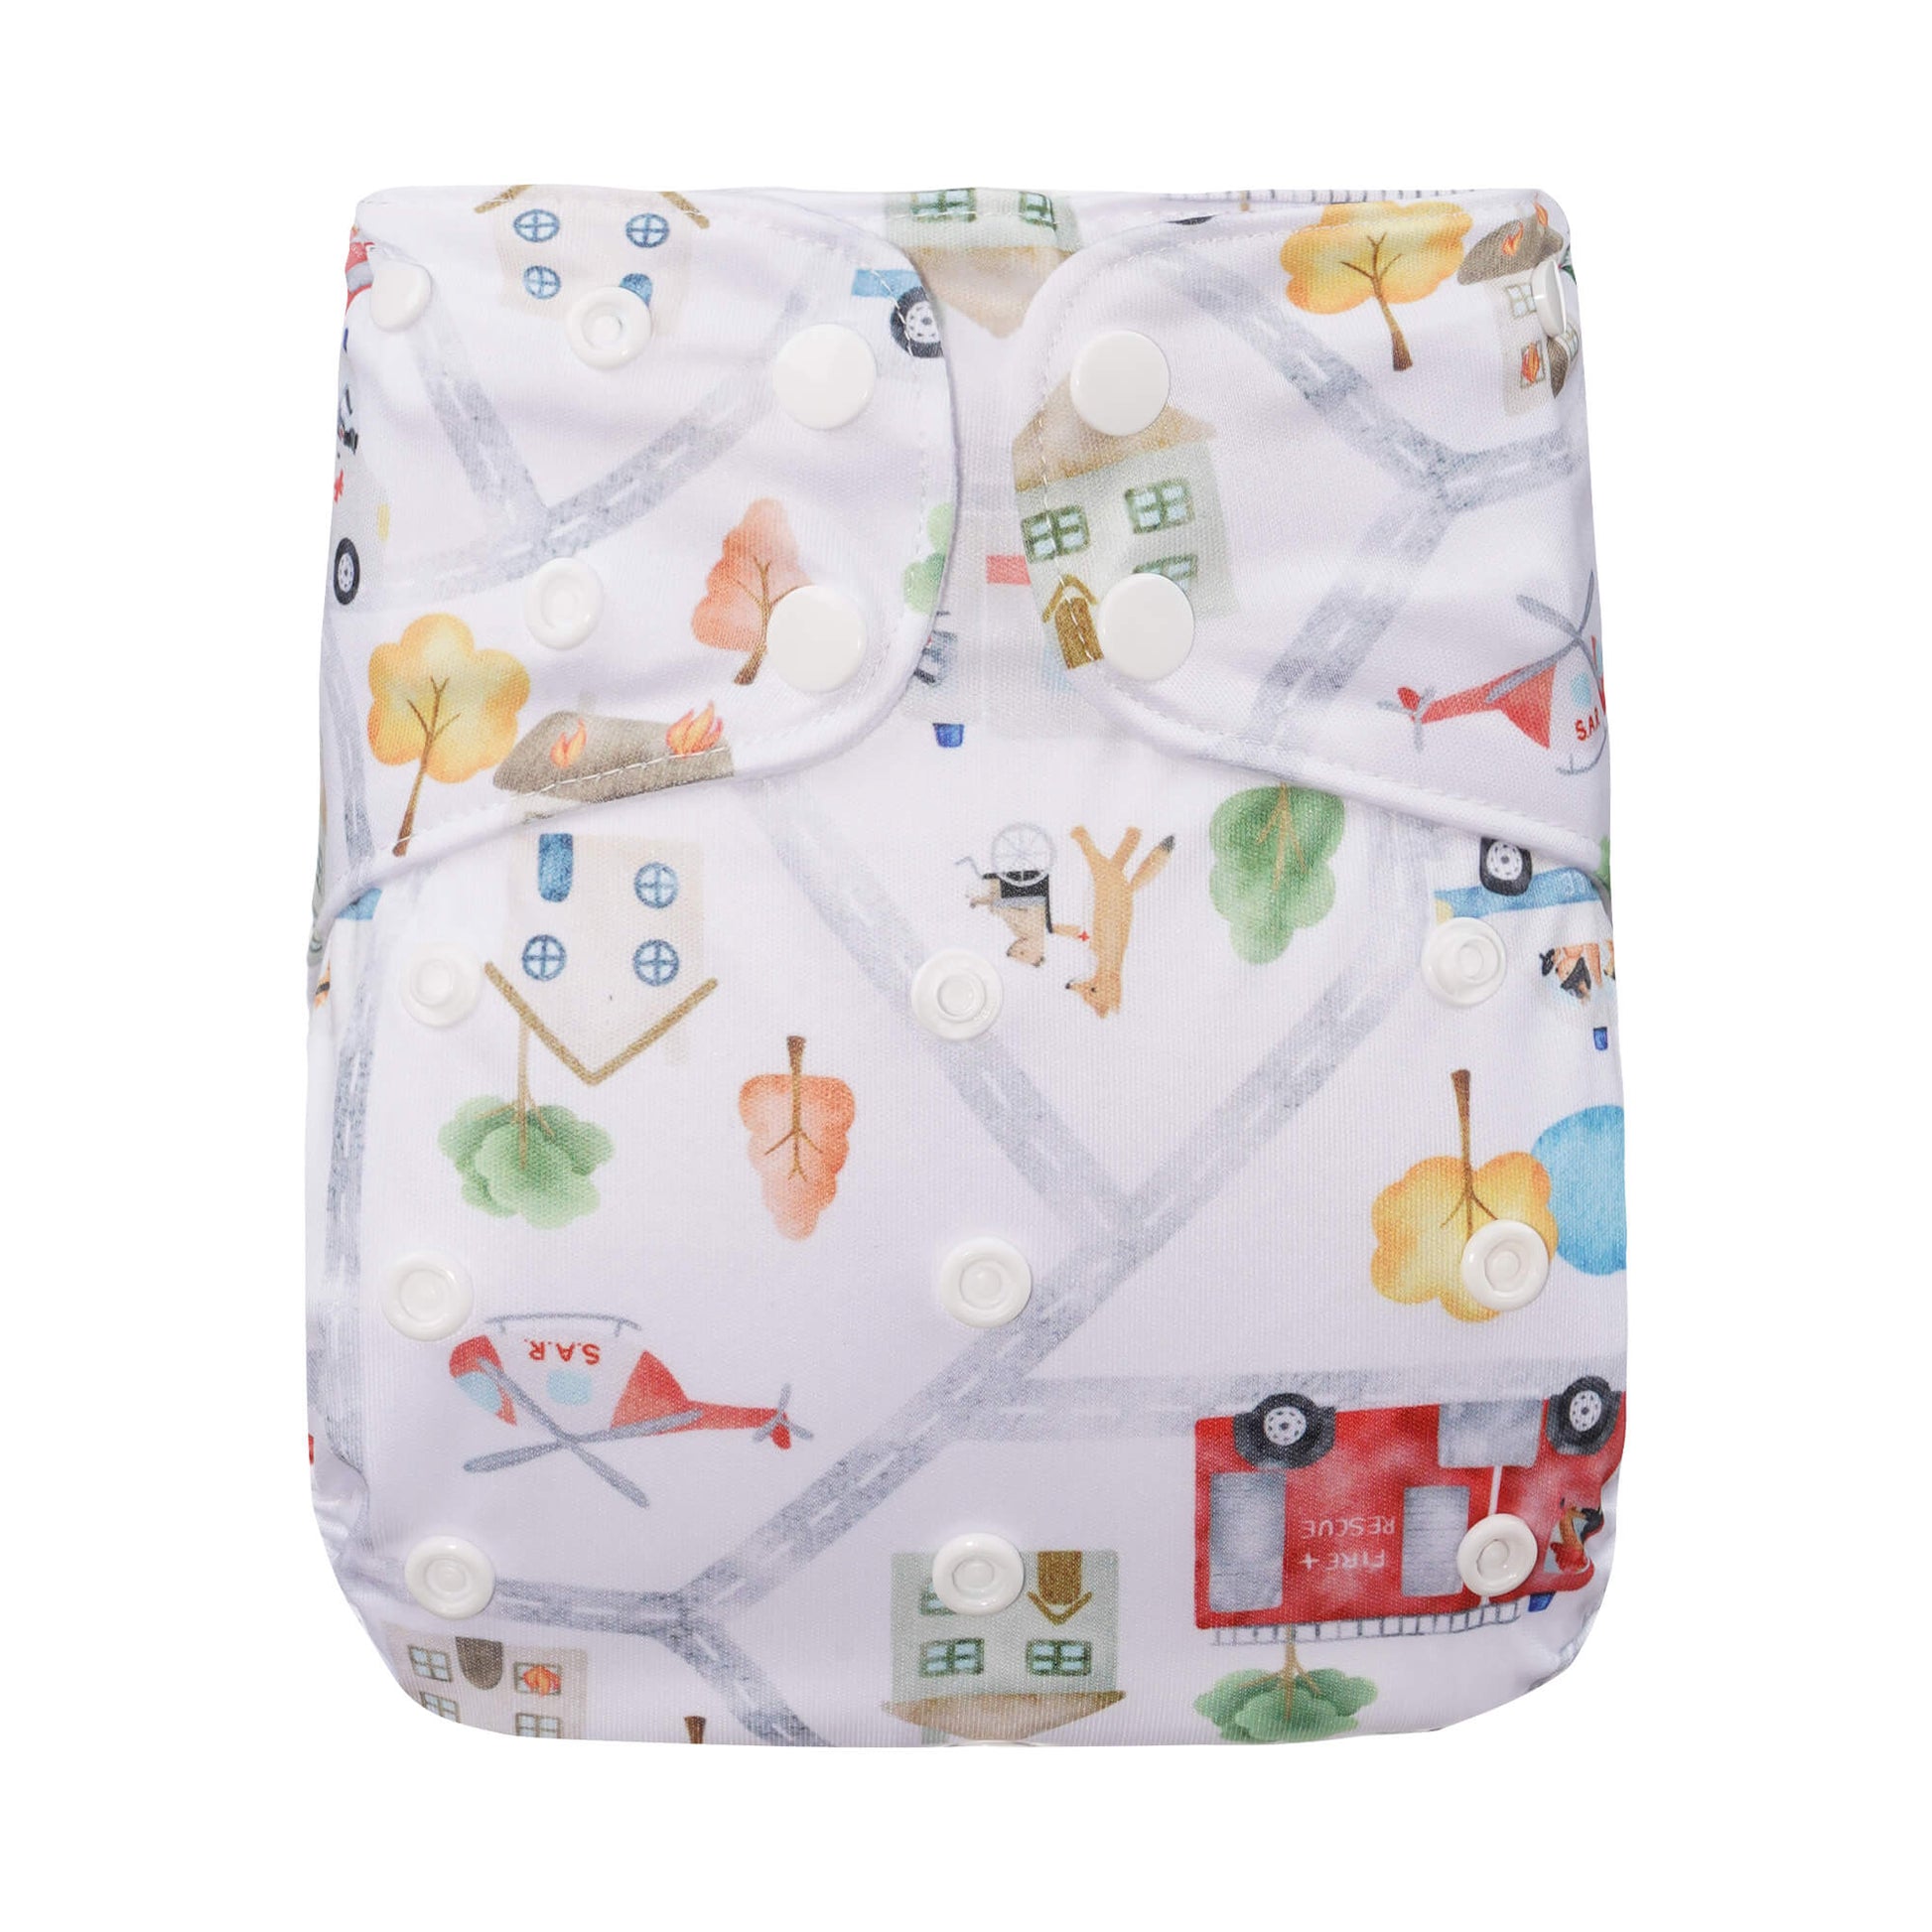 Large Reusable Cloth Nappy by Bear & Moo in Emergency Village print